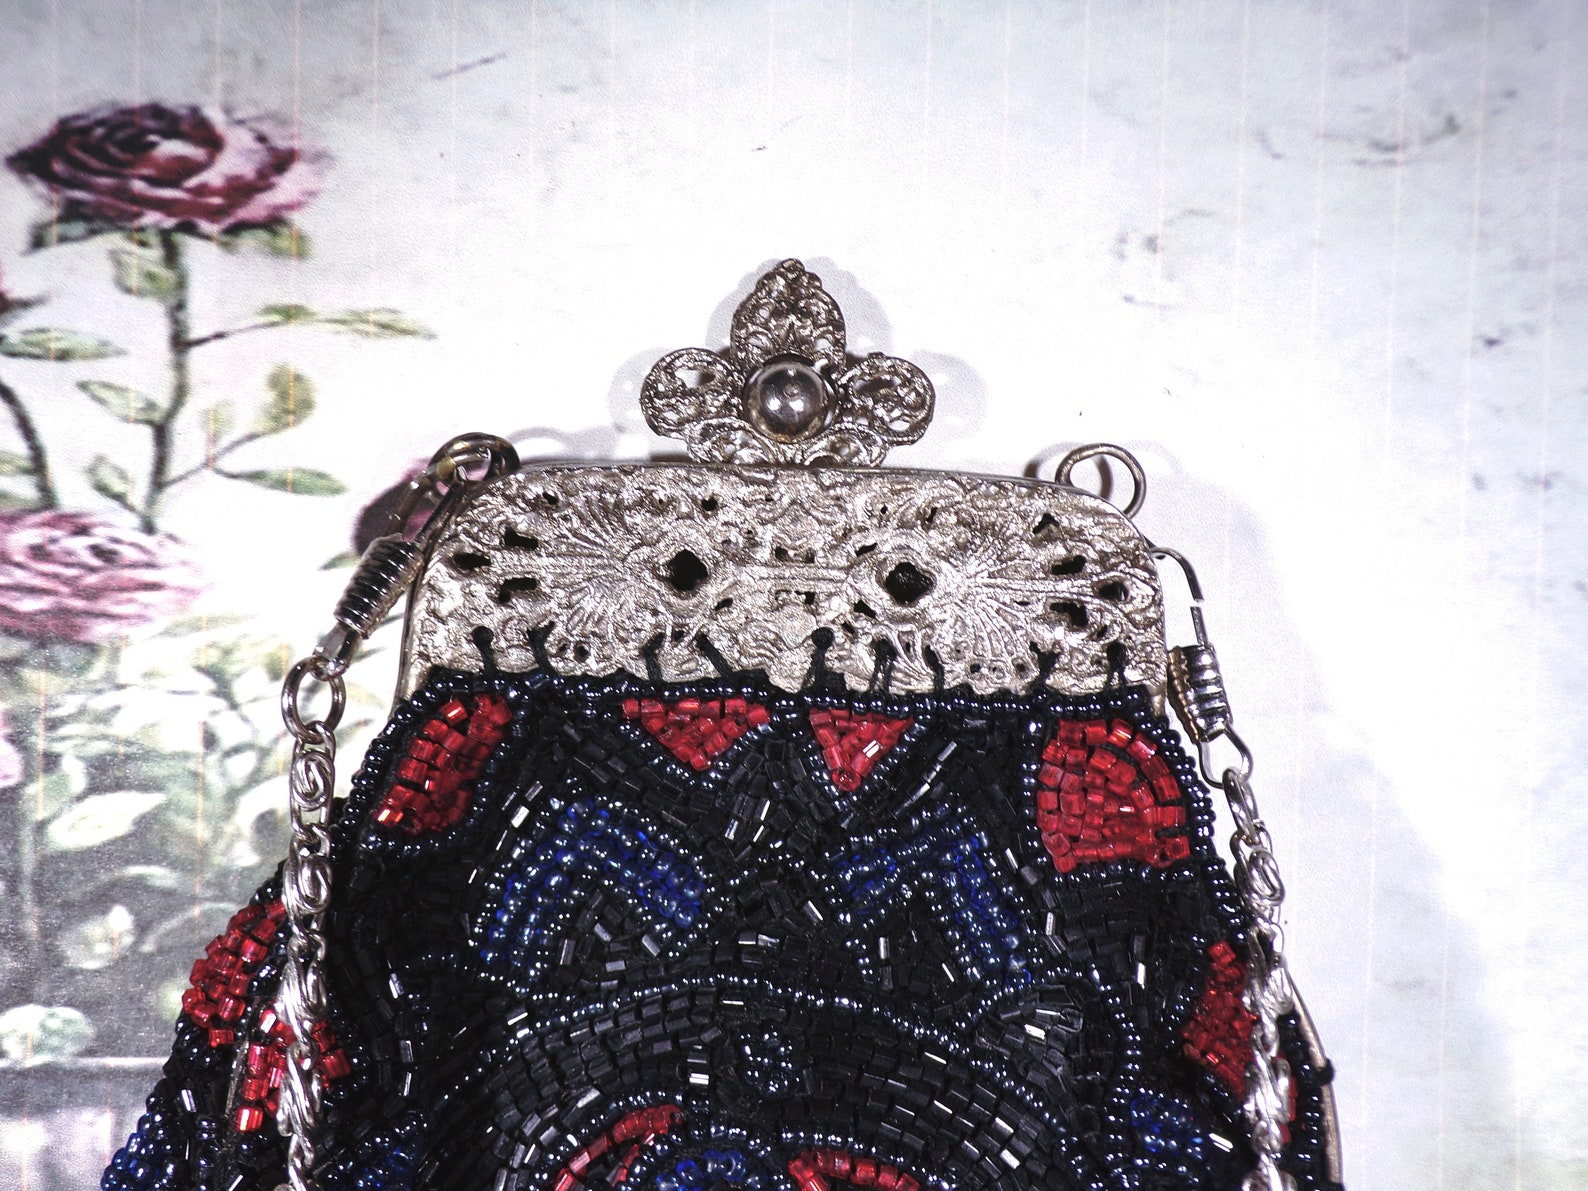 Beaded Purse Victorian Revival Black Blue and Dark Red Beaded - Etsy